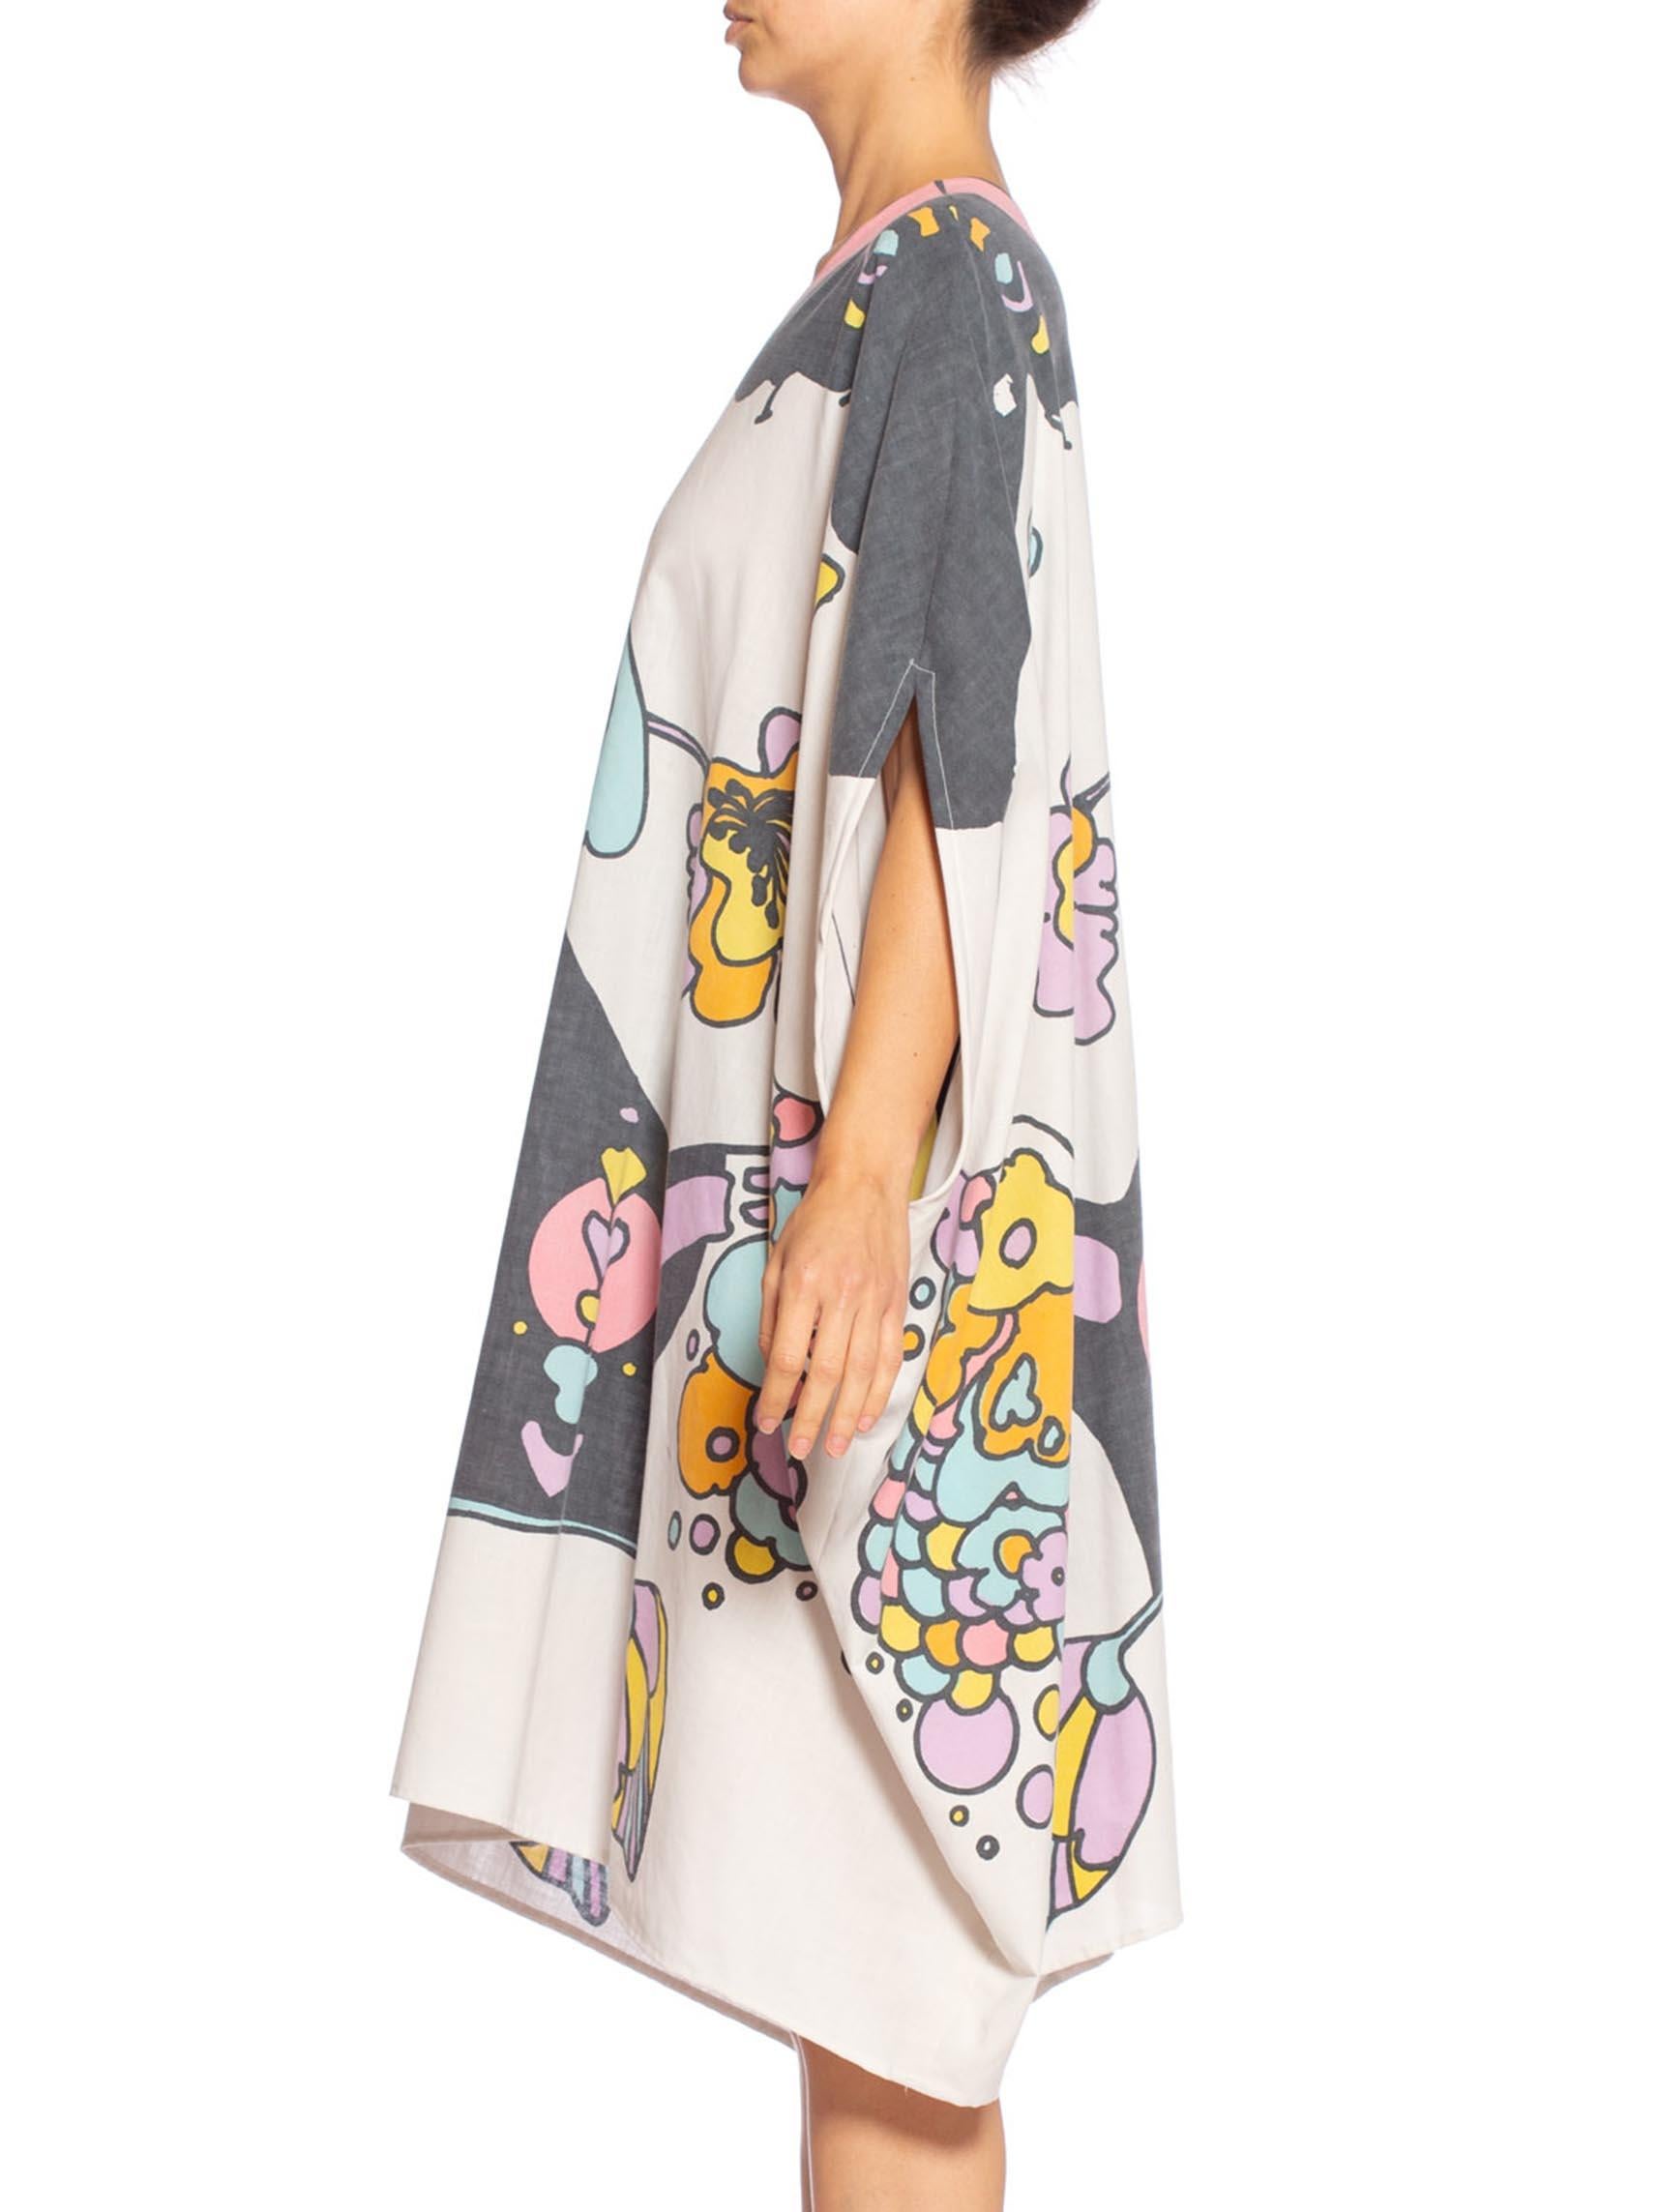 MORPHEW COLLECTION Style Psychedelic Cotton Peter Max Printed Kaftan In Excellent Condition For Sale In New York, NY